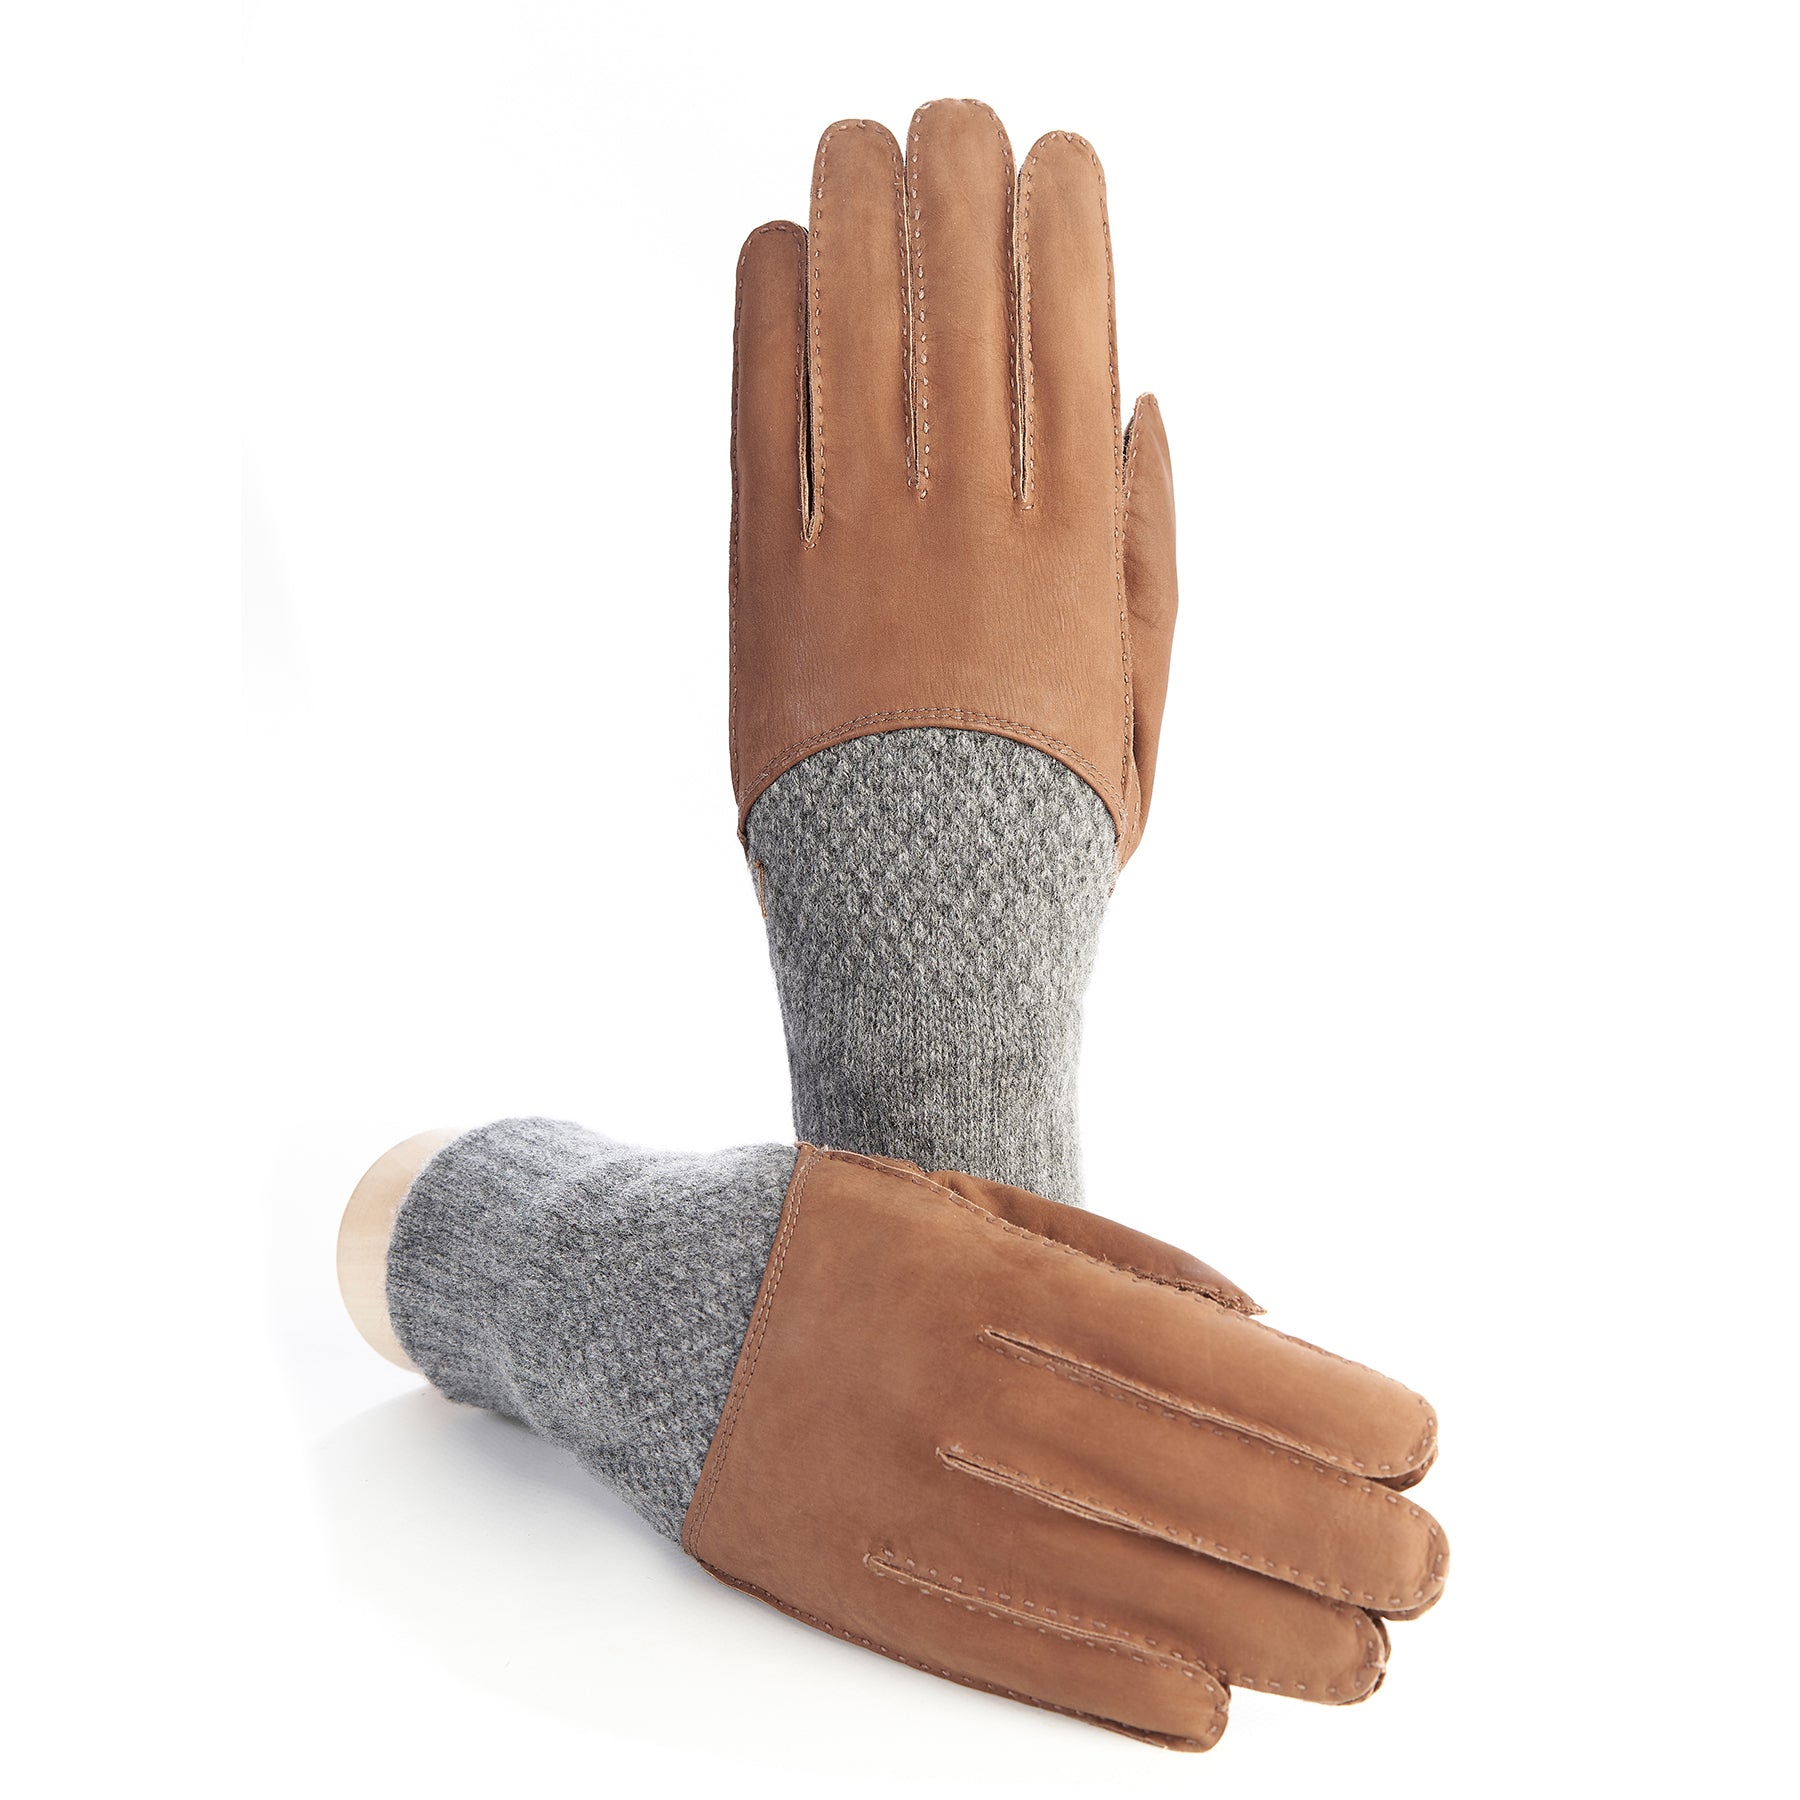 Men's hand-stitched nubuk gloves in color tobacco with grey cashmere top and lining